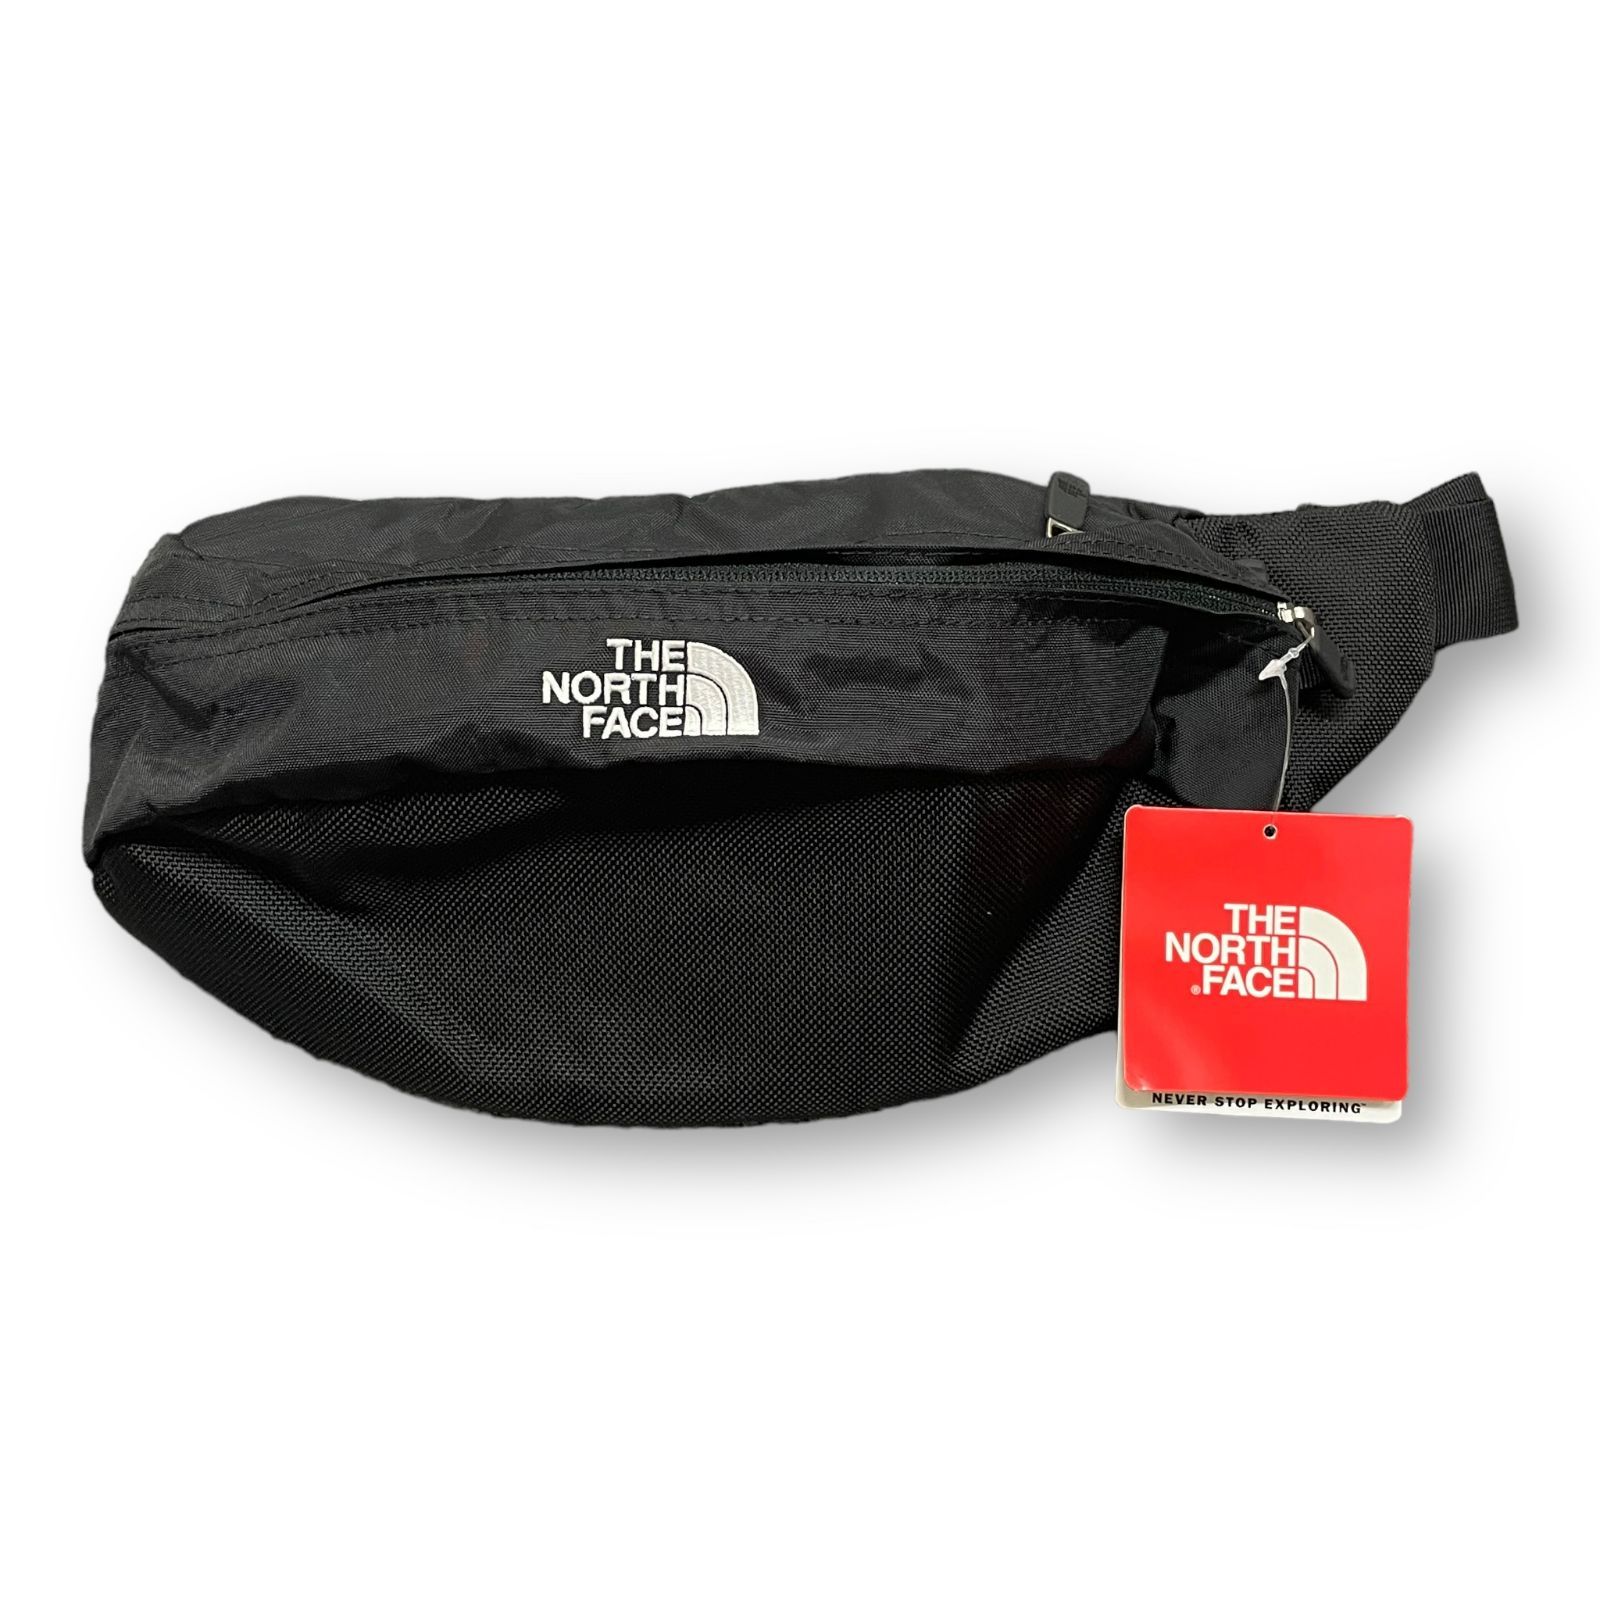 THE NORTH FACE SWEEP NM71904 K ブラック 未使用品 - ボディバッグ ...